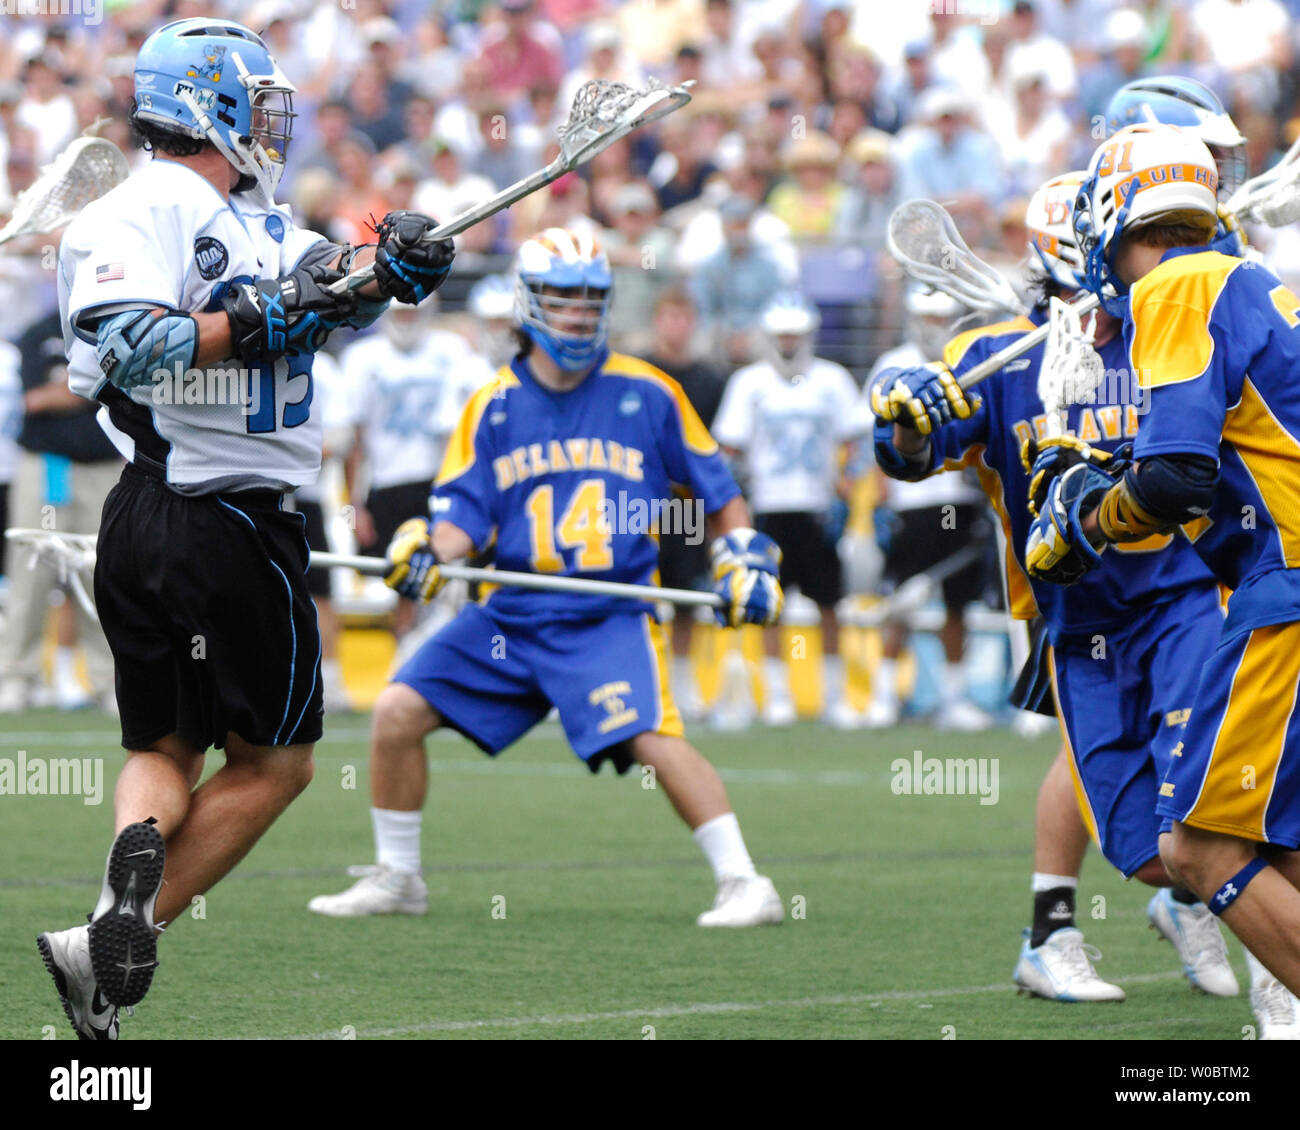 Johns Hopkins University Blue Jays Michael Kimmel (15) scores his third goal of the game in the fourth quarter against the Delaware Blue Hens in the semi-final of the NCAA Division I lacrosse championship at M&T Bank Stadium in Baltimore, Maryland on May 26, 2007.   Johns Hopkins defeated Delaware 8-3 to move to the lacrosse championship.   (UPI Photo/ Mark Goldman) Stock Photo